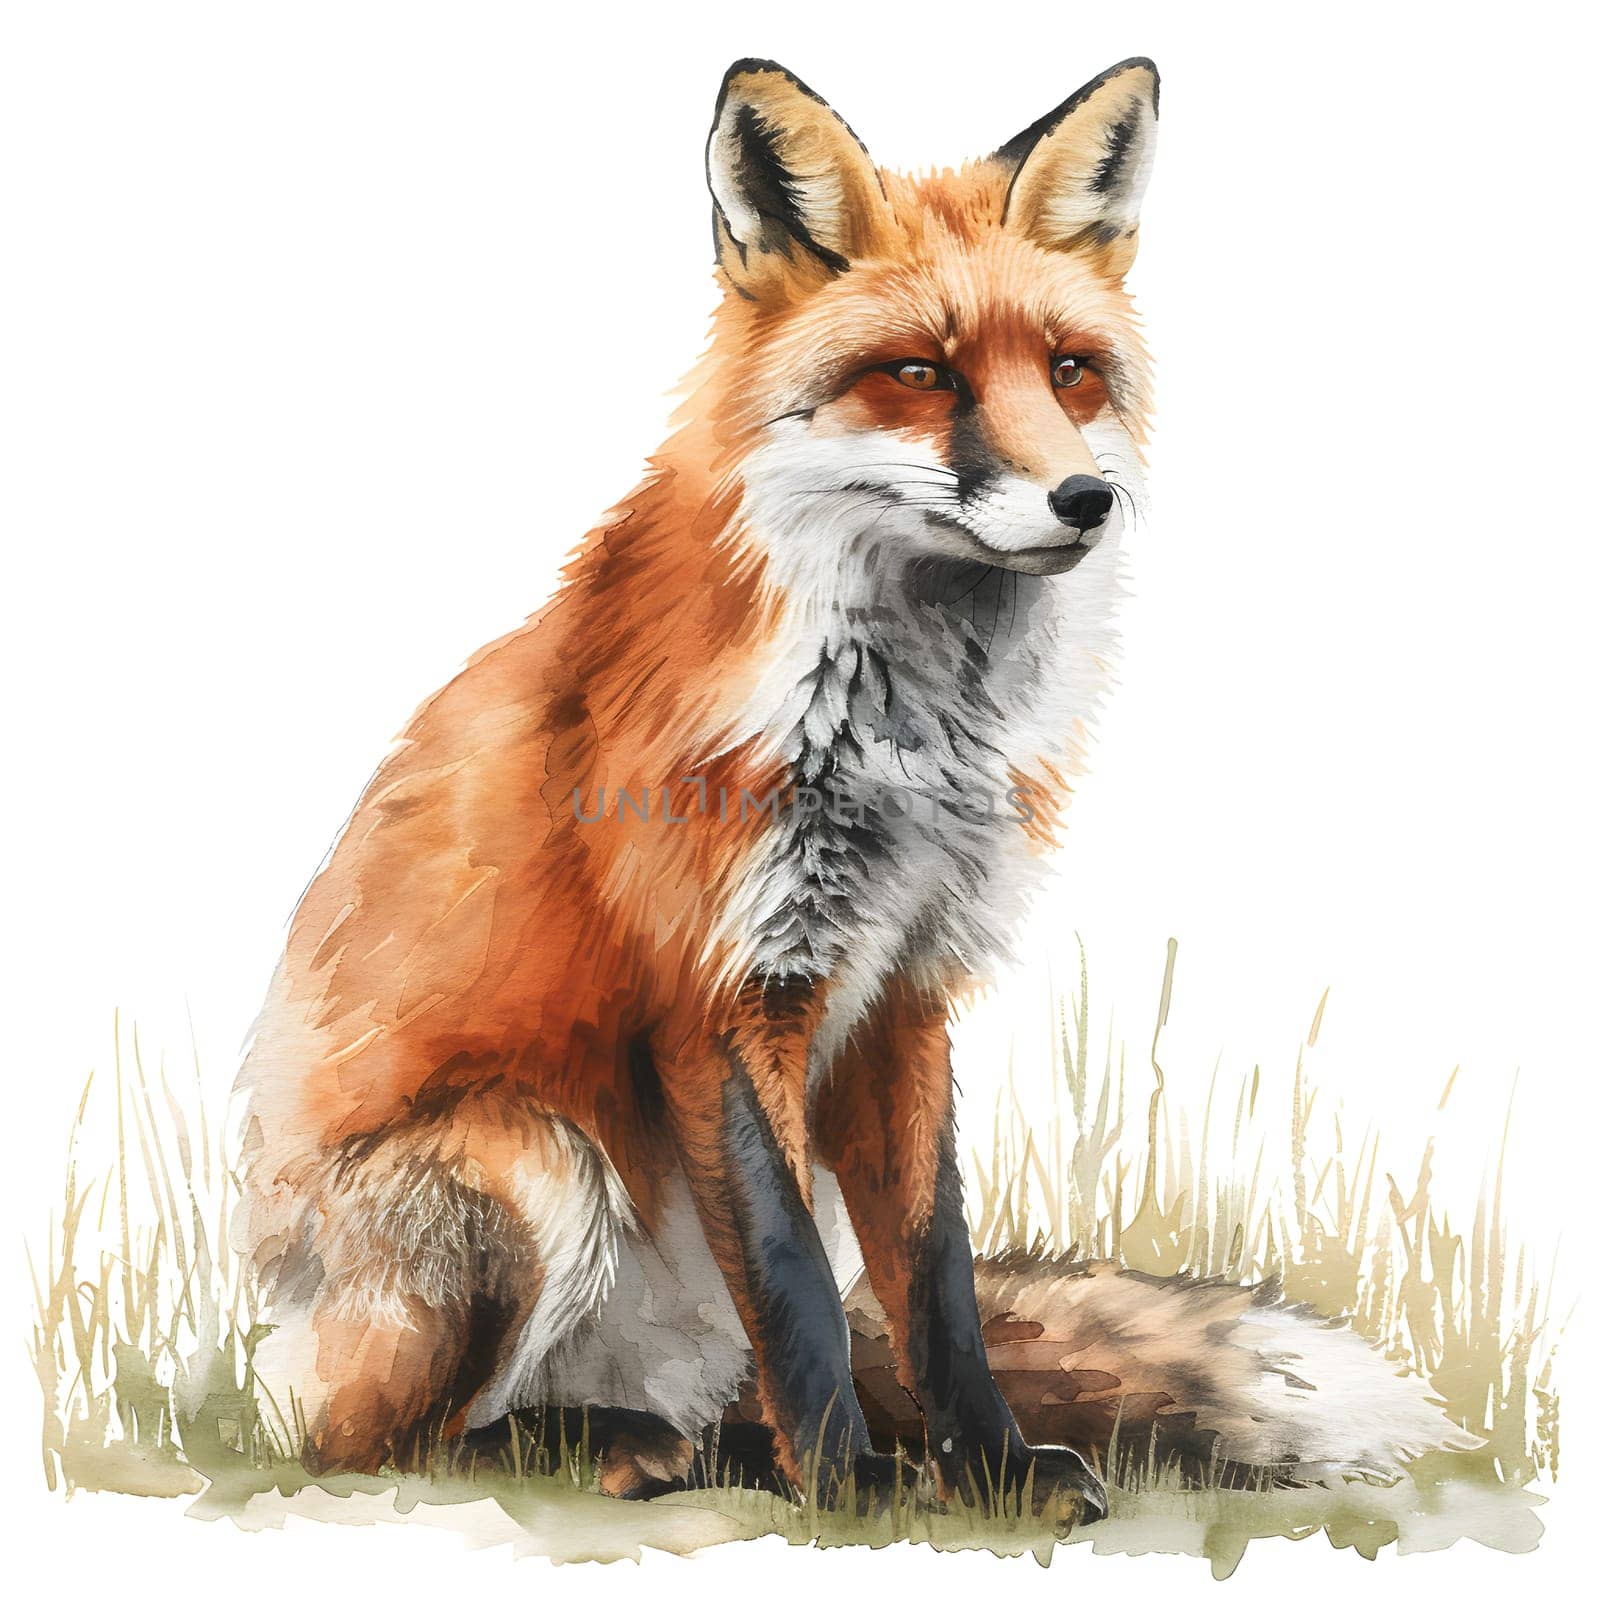 A carnivorous terrestrial animal, the red fox, is depicted sitting gracefully in the grass on a white background in a beautiful painting